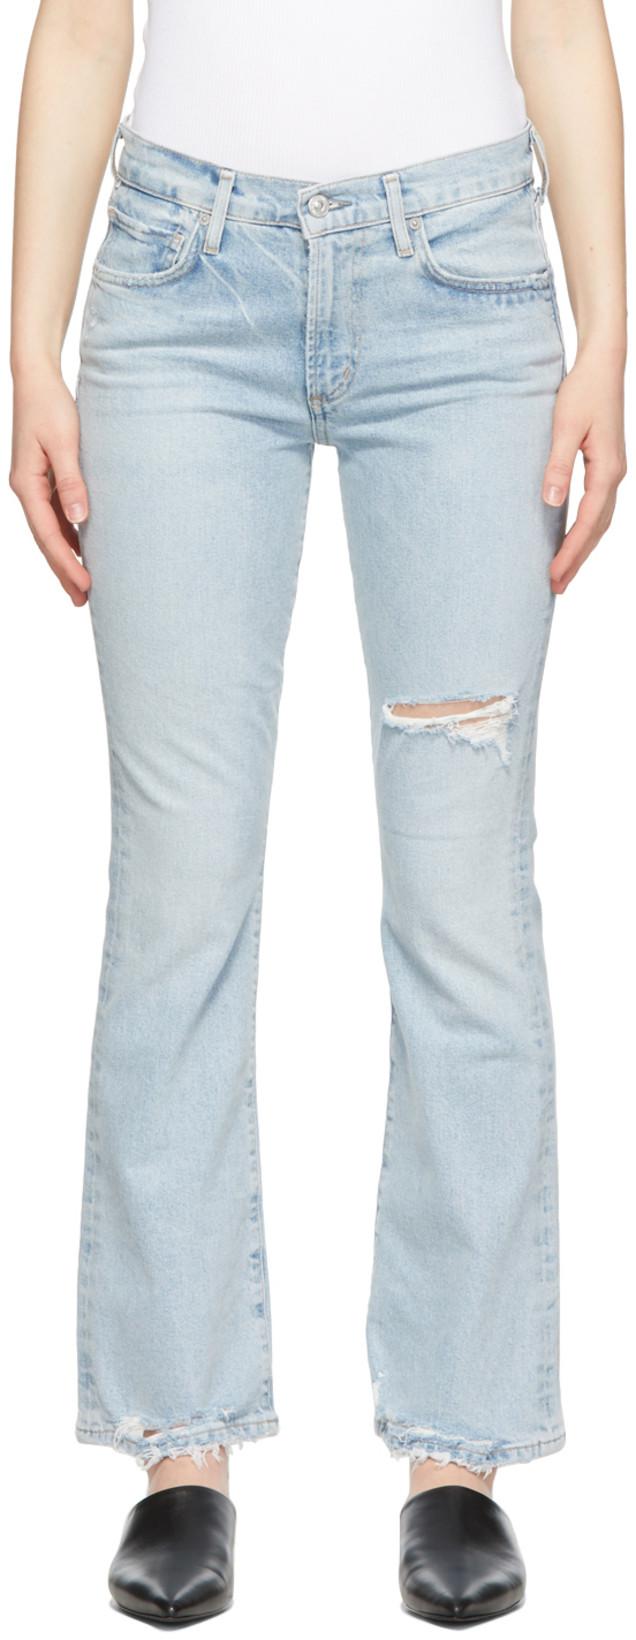 Blue Emannuelle Jeans by CITIZENS OF HUMANITY